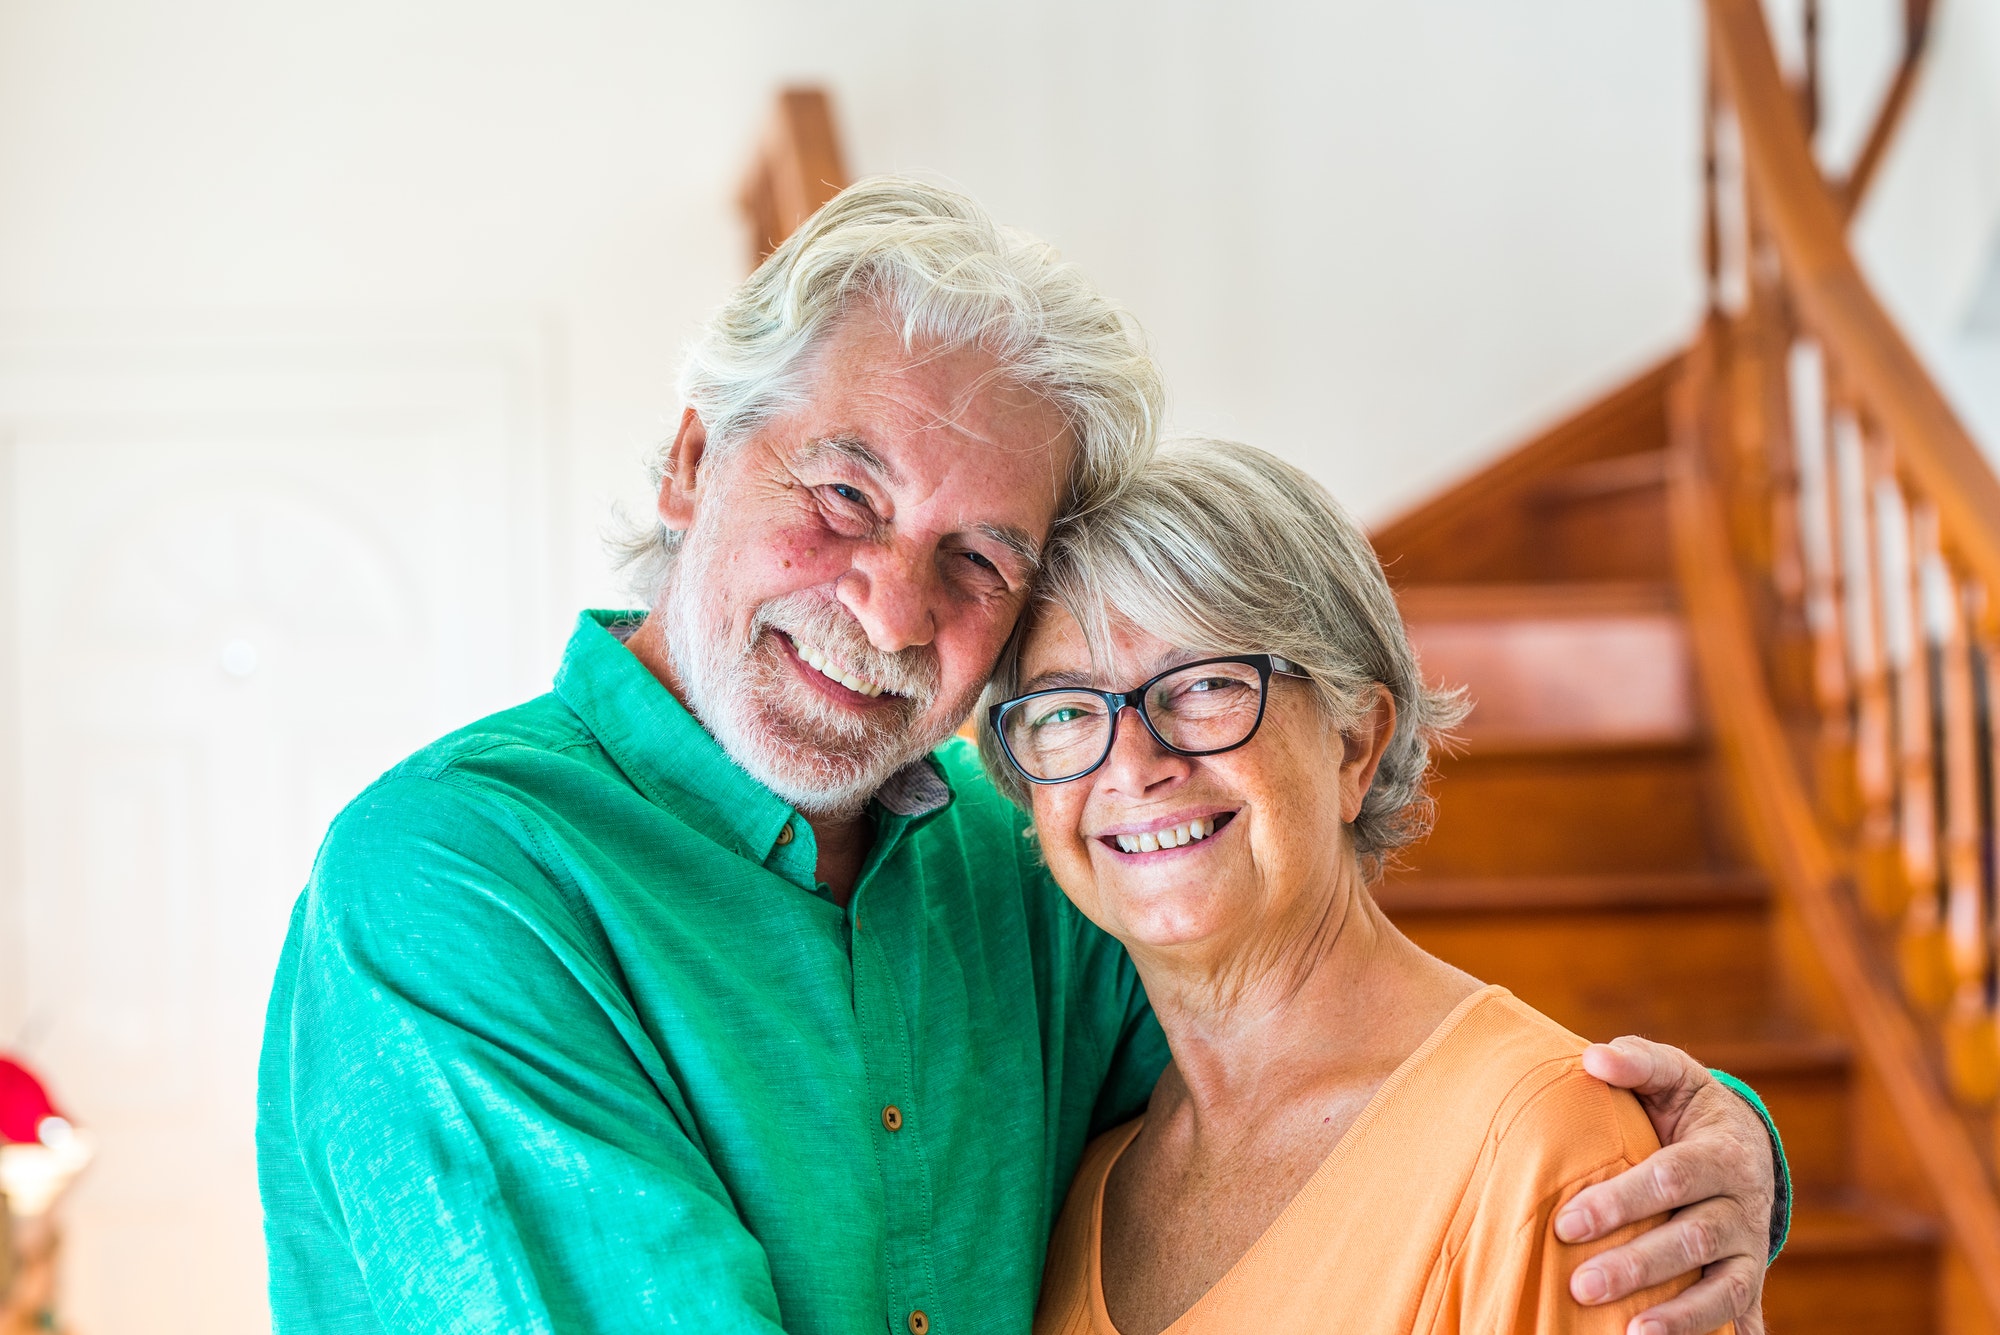 portrait and close up of two happy seniors or mature and old people smiling and looking the camera